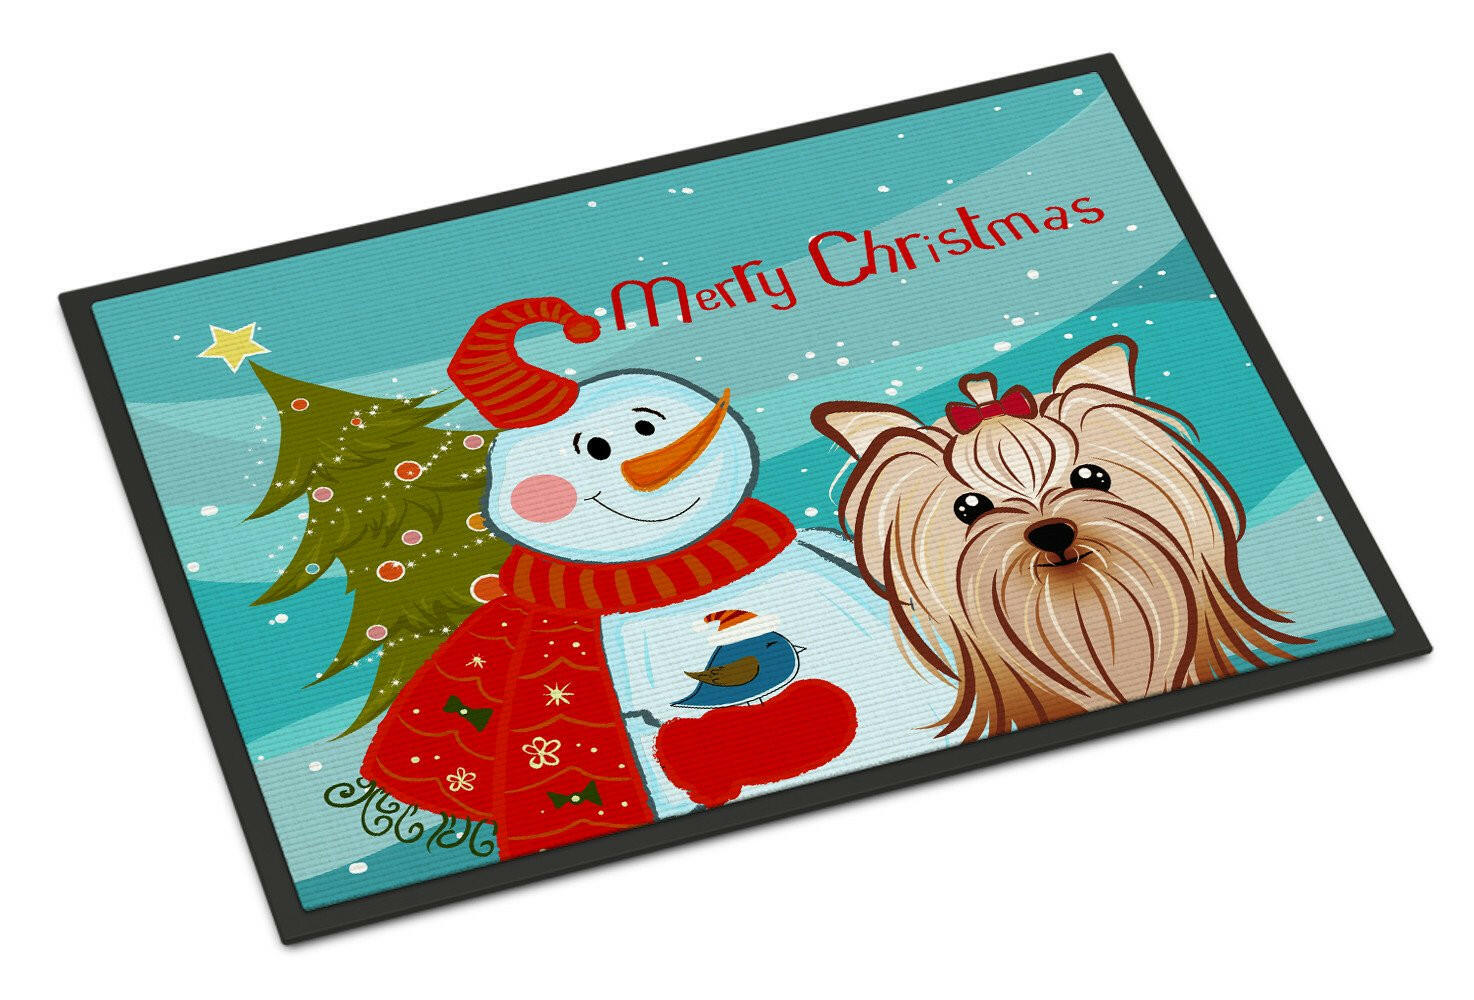 Snowman with Yorkie Yorkshire Terrier Indoor or Outdoor Mat 18x27 BB1824MAT - the-store.com